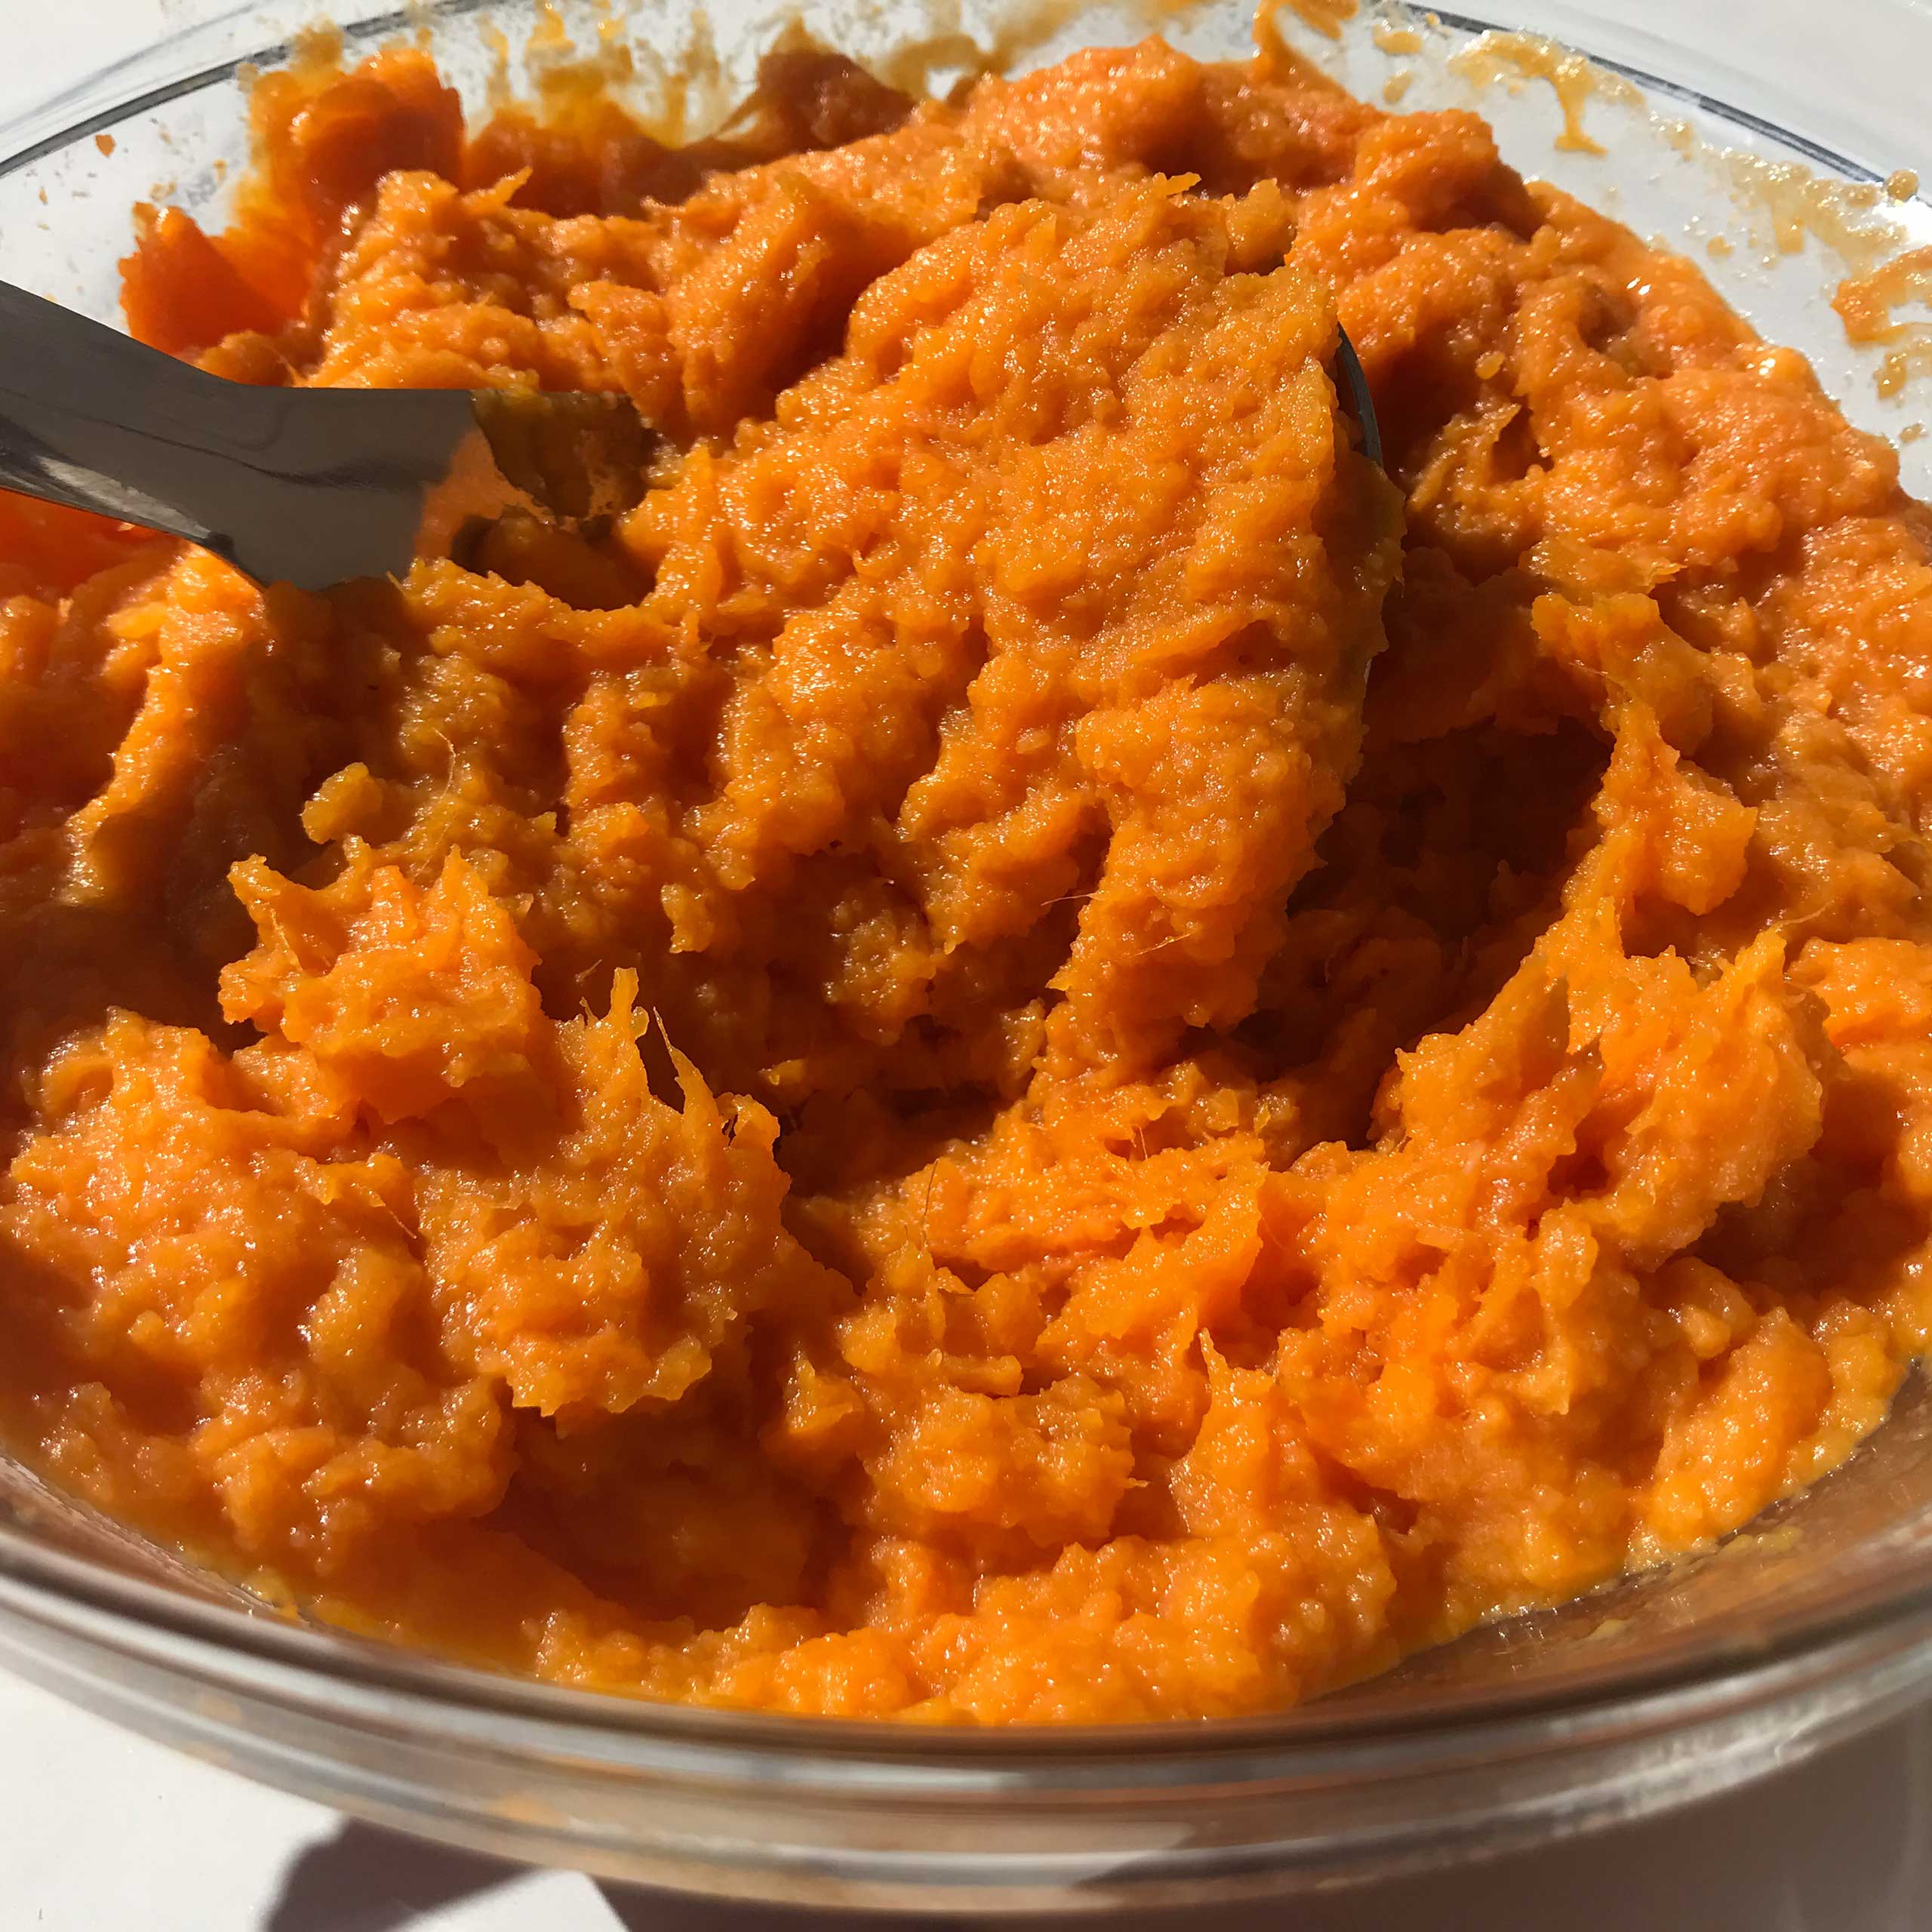 mashed sweet potato mixture in a bowl.